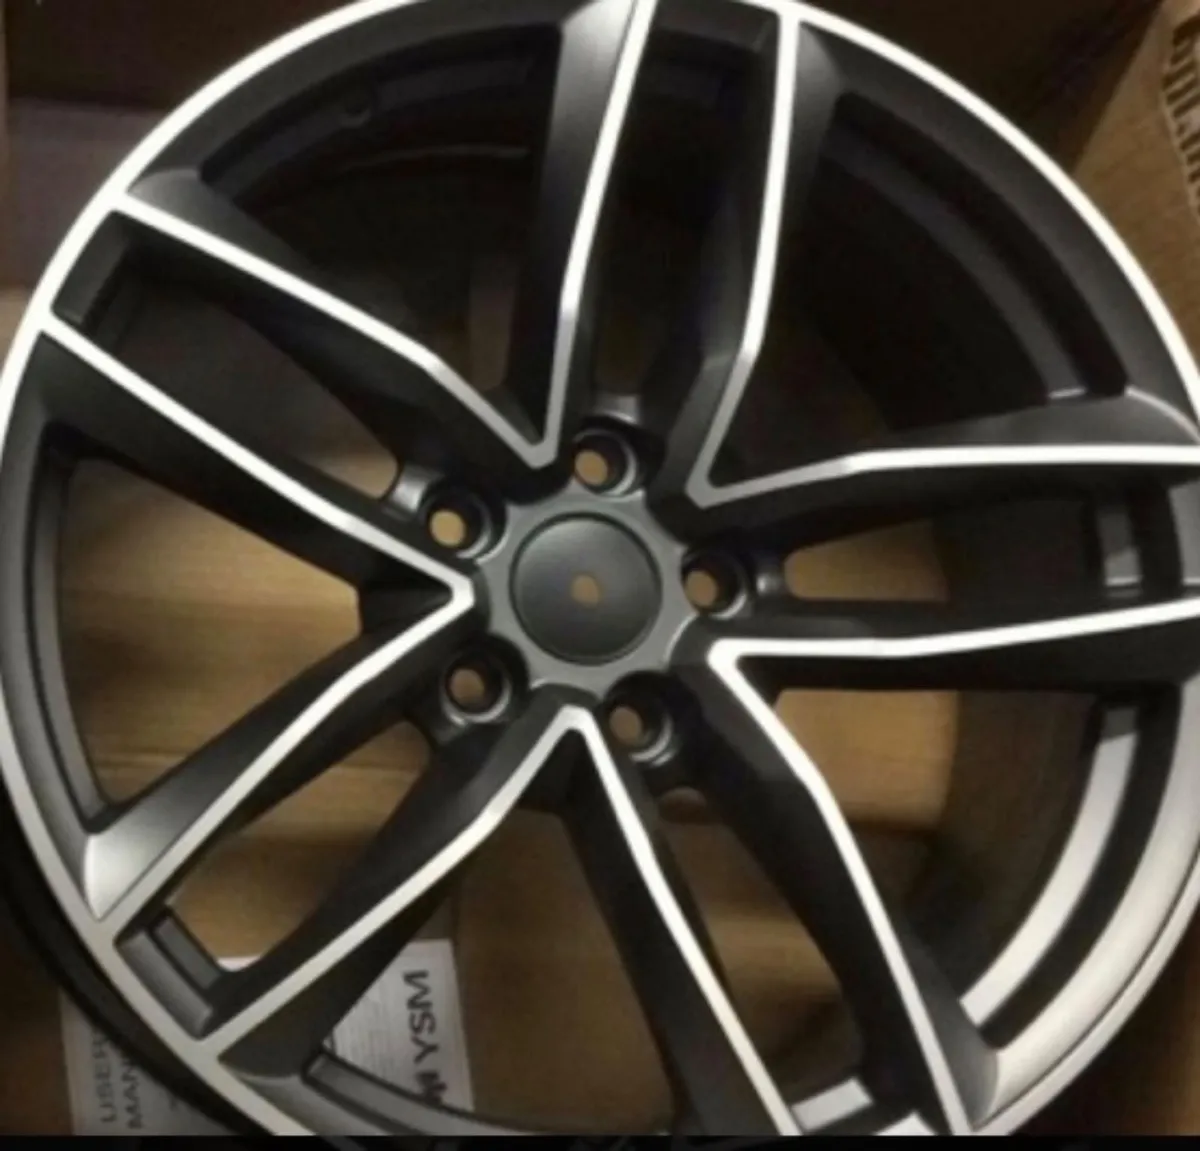 18” rs6 c alloys & tyres new